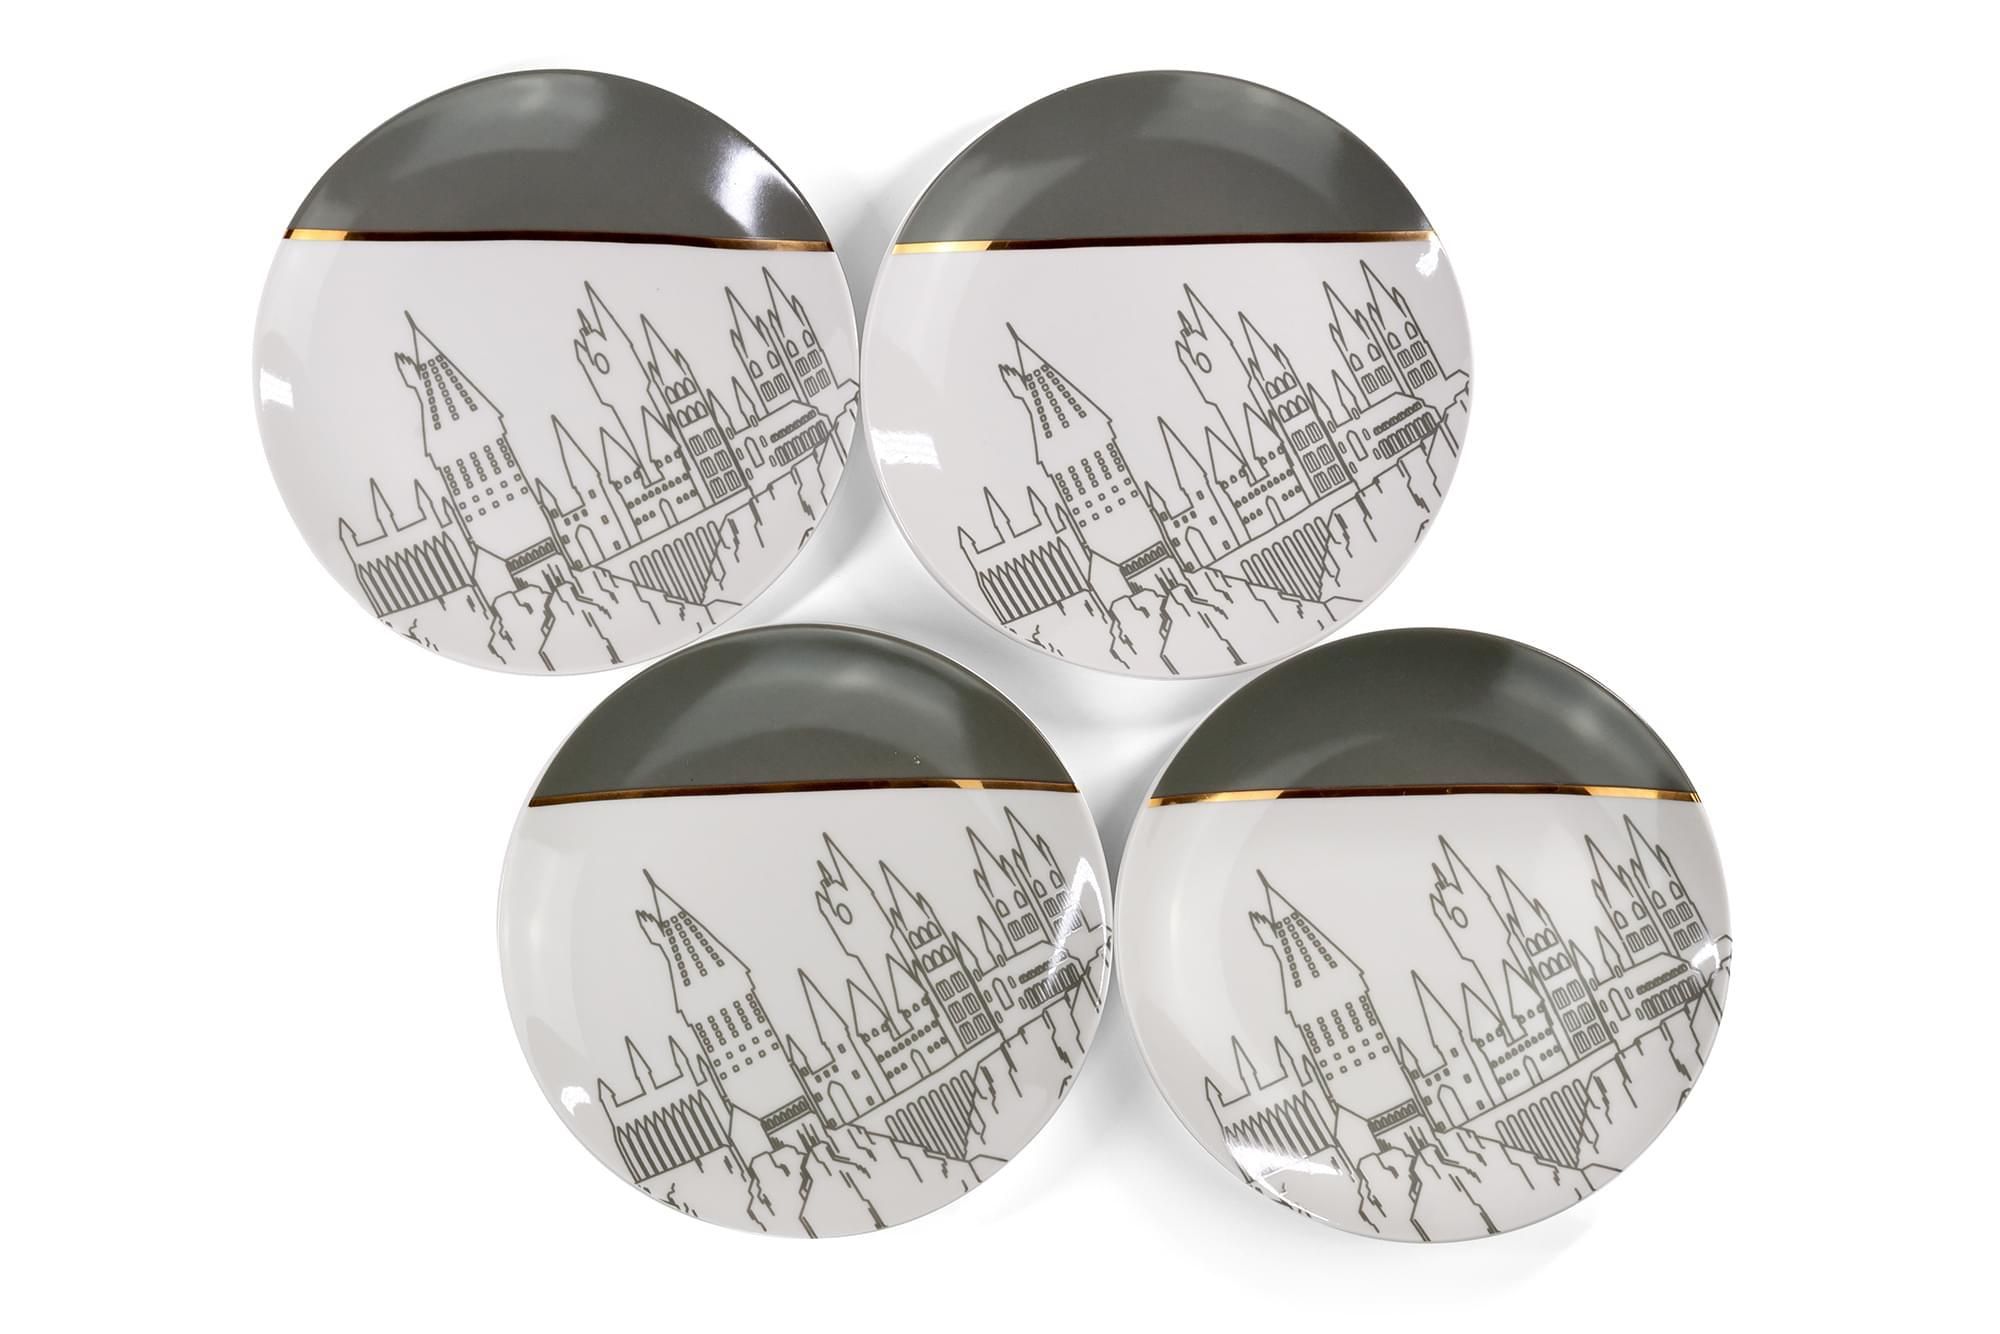 Hogwarts White & Grey Ceramic Plate Collection 